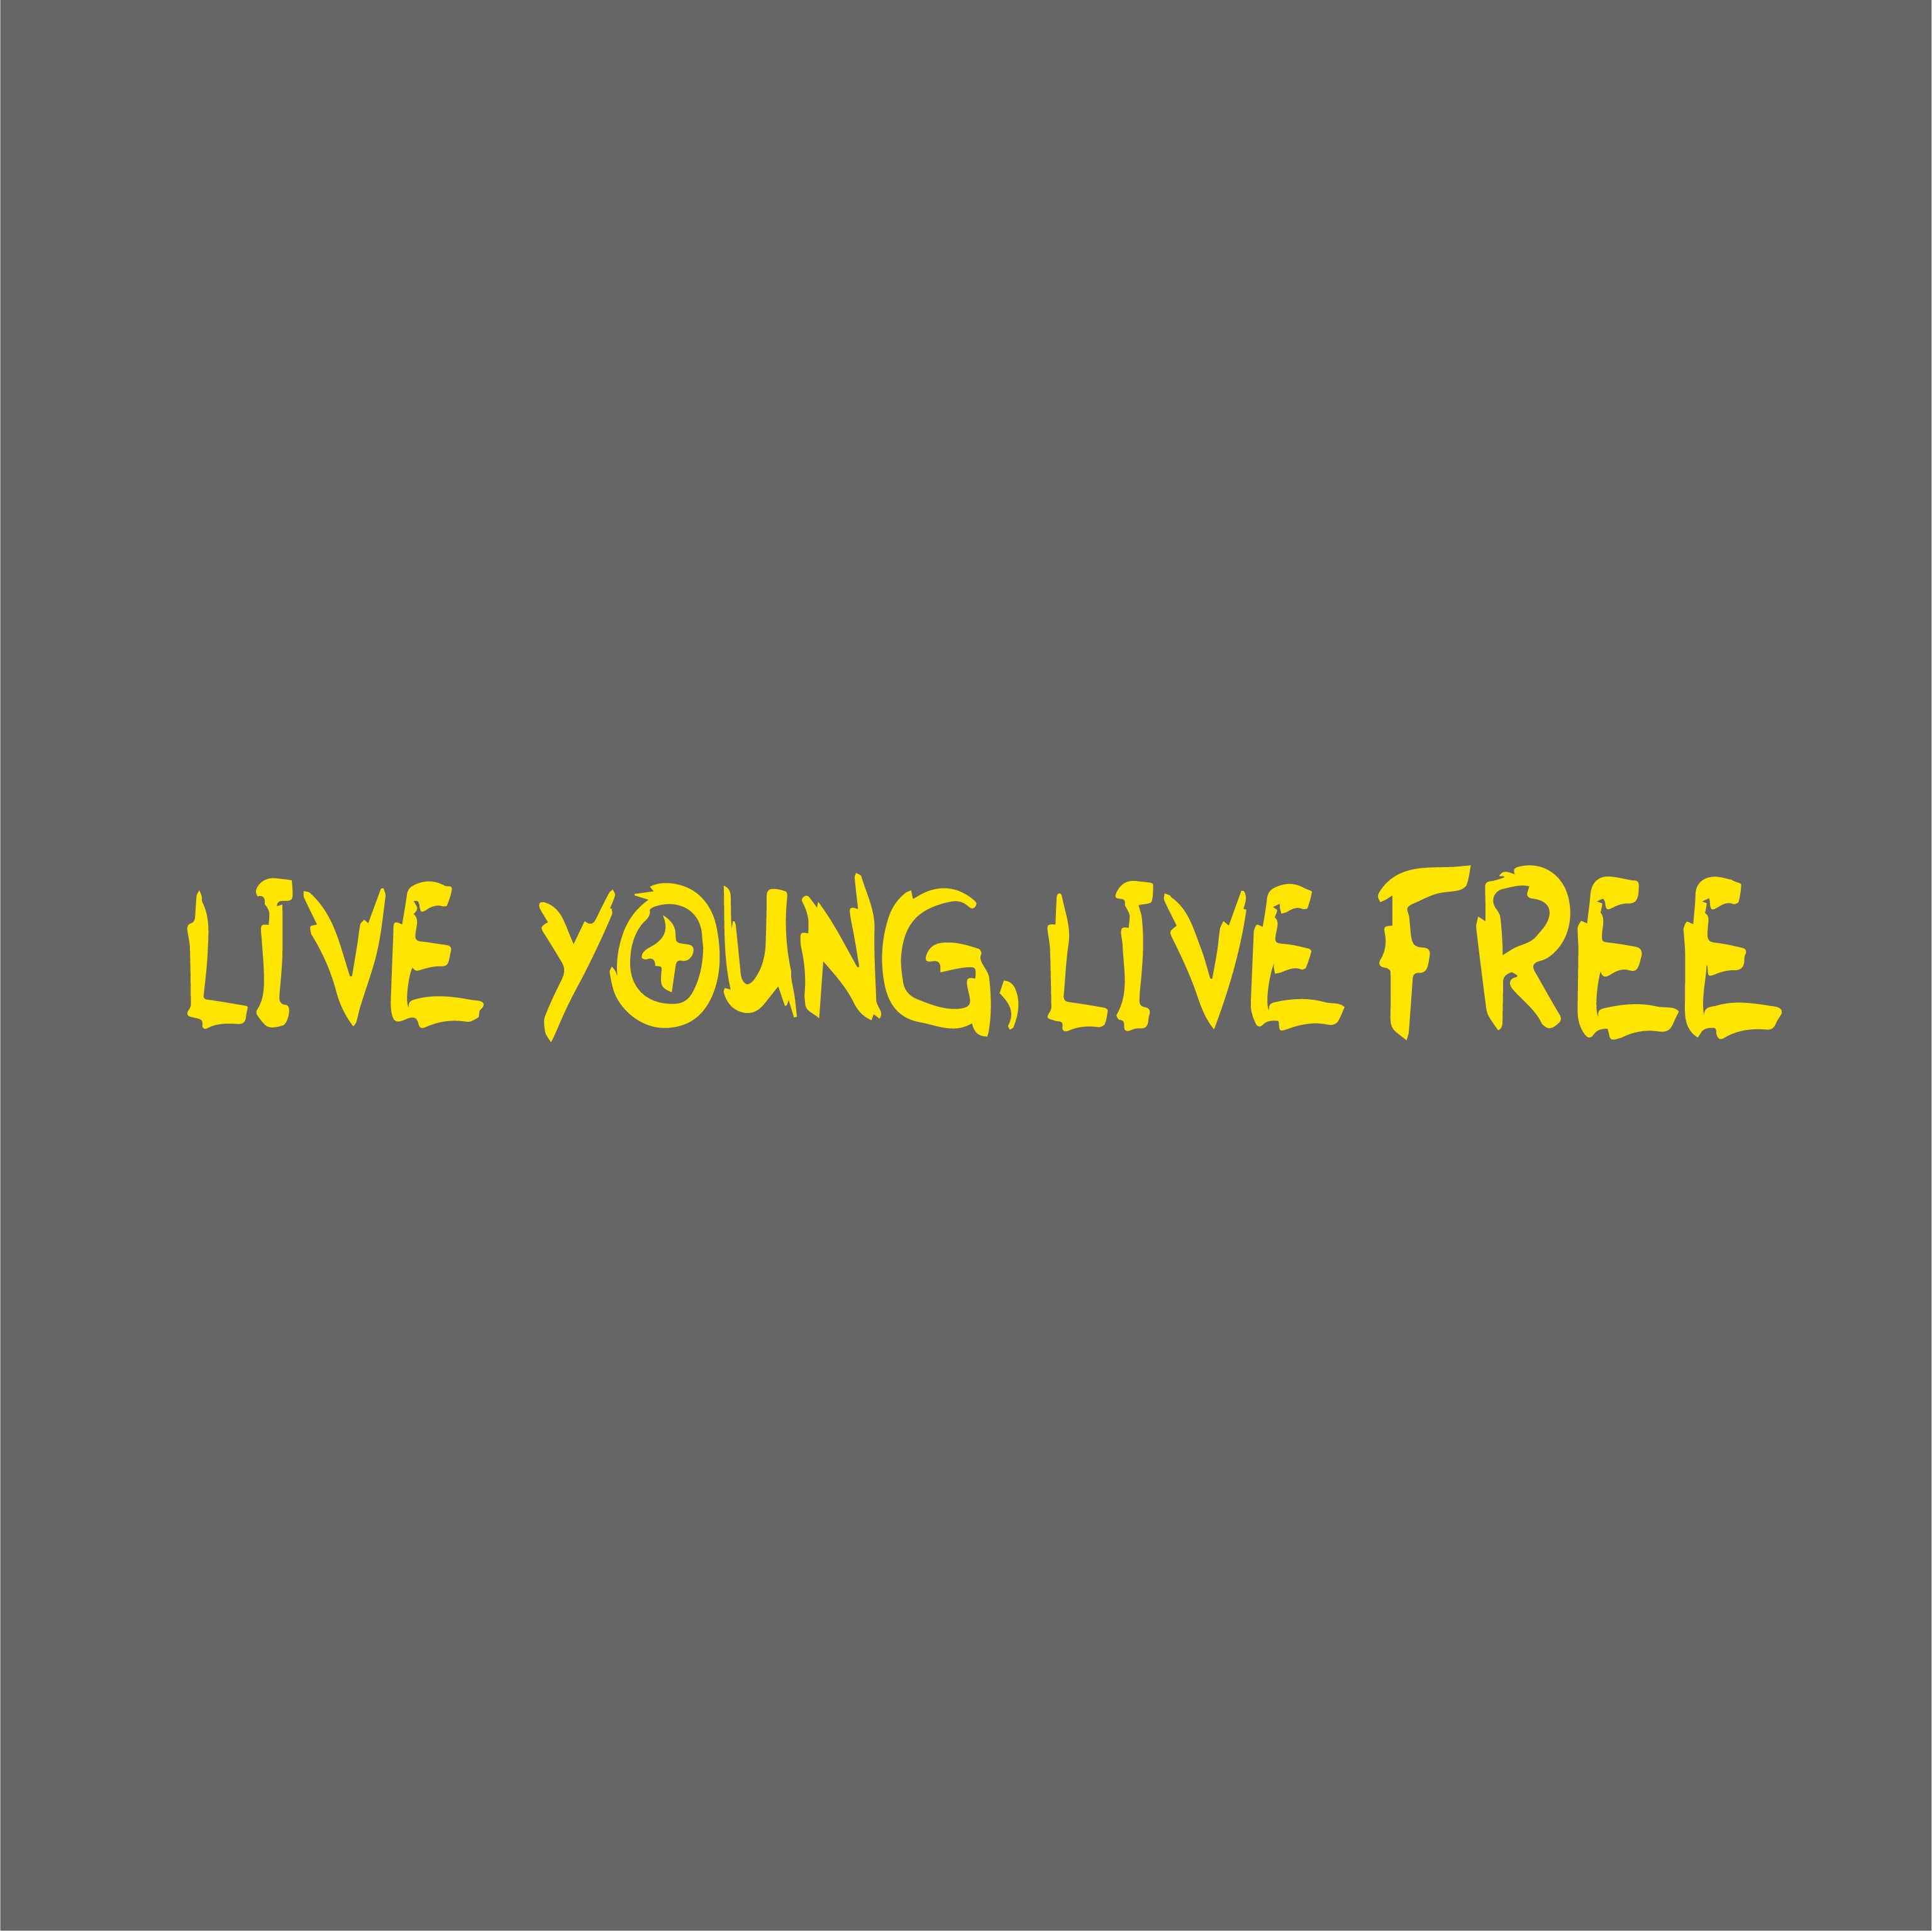 Project Paper Bridge - Independence Day | Live Young Live Free - YouTube